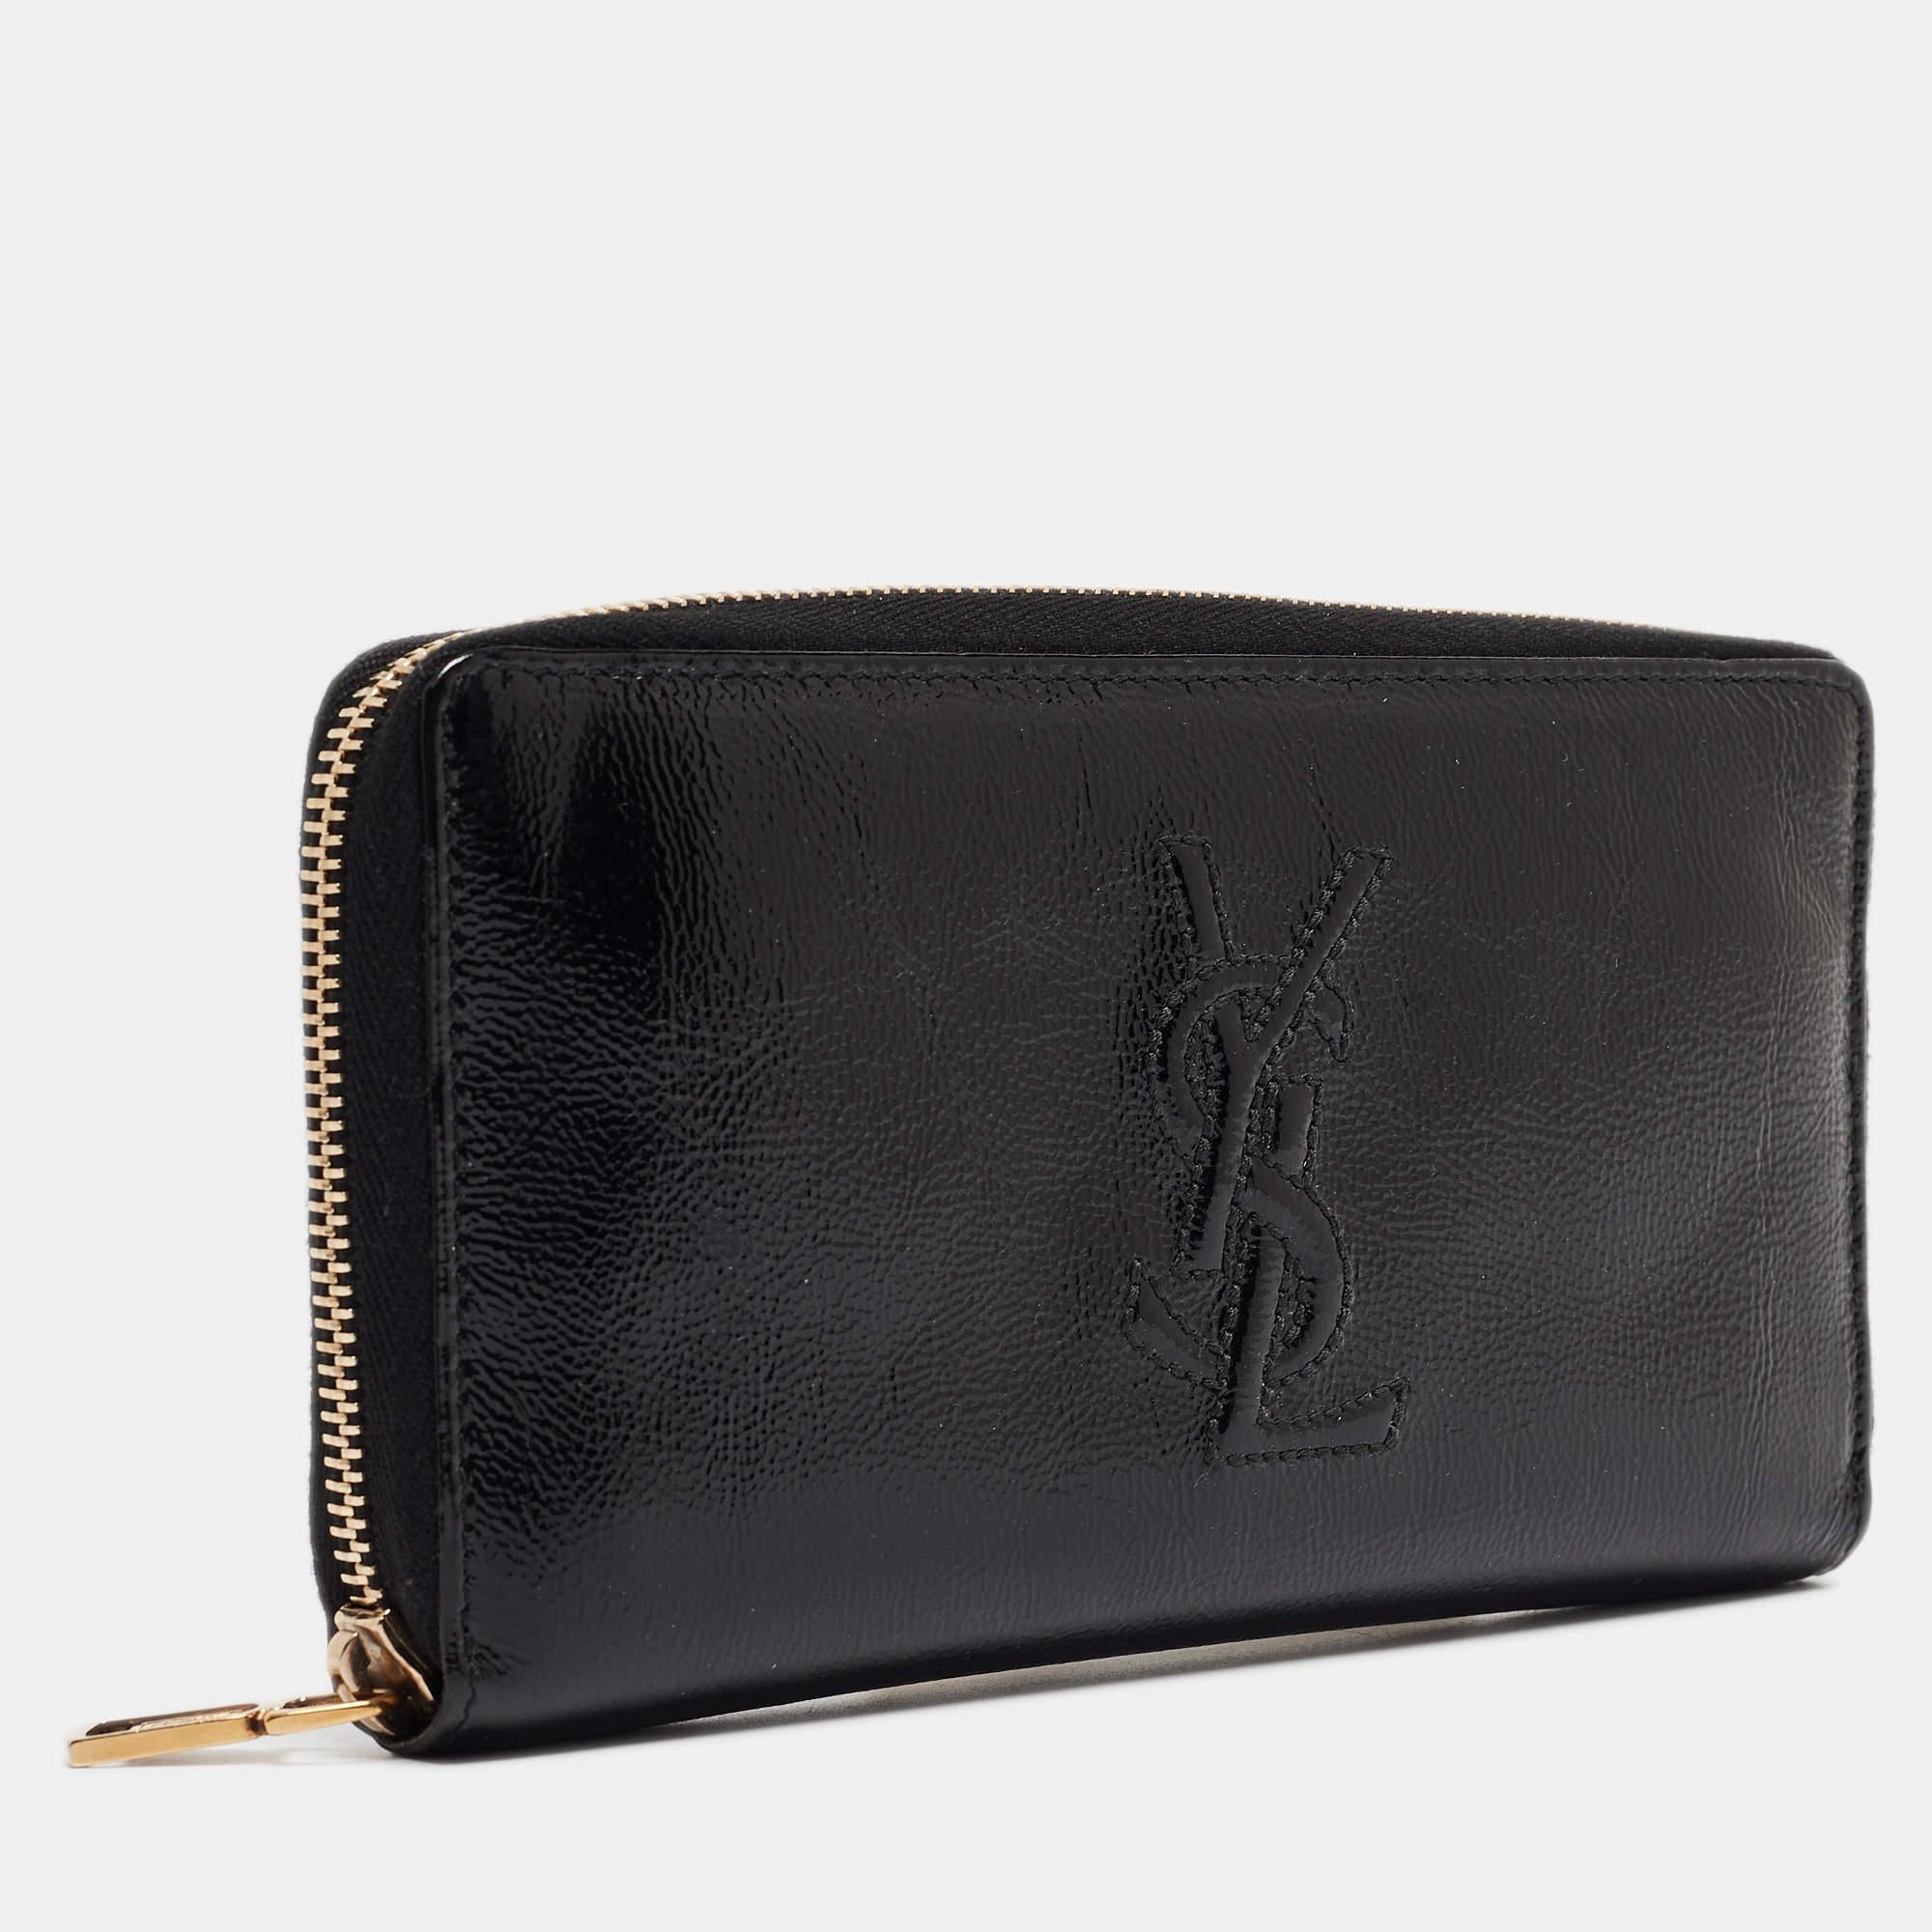 A wallet should not only be good-looking but also functional, just like this pretty Belle De Jour wallet from Yves Saint Laurent. Crafted using black patent leather, this creation flaunts a leather-fabric interior and gold-tone hardware. This wallet